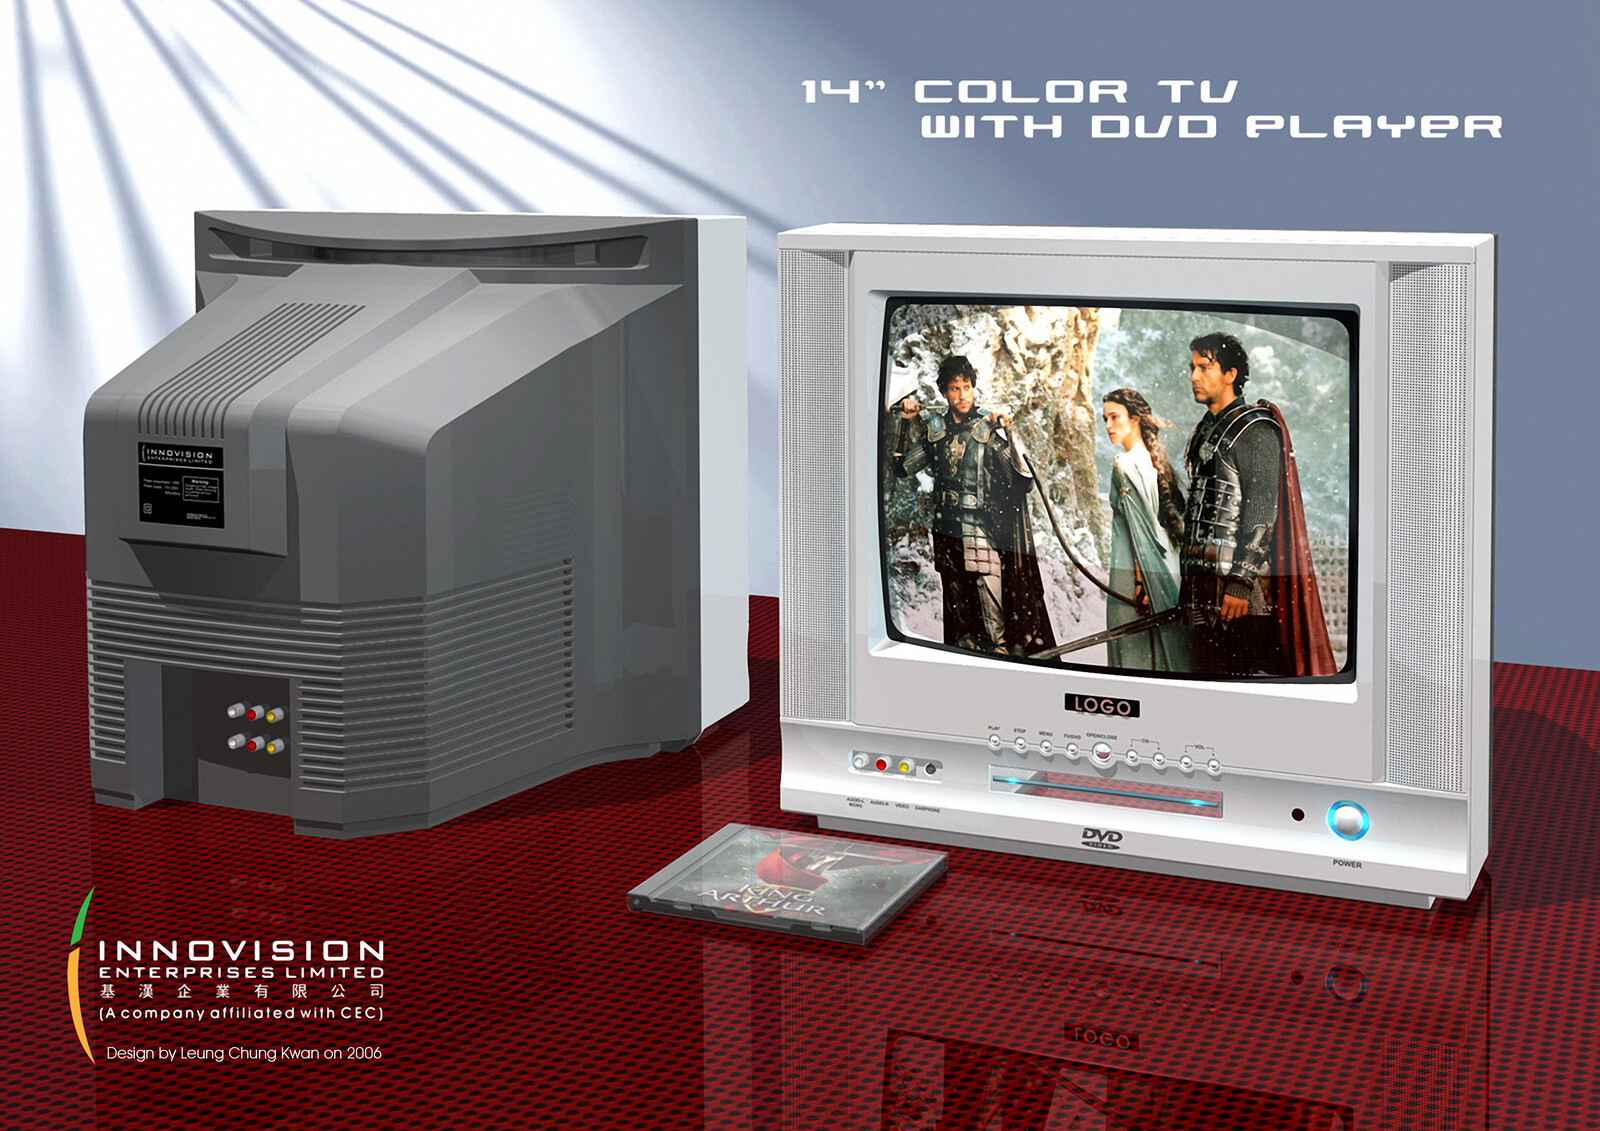 💎 CRT Color TV with DVD Player Combo | Design by Leung Chung Kwan on 2006 💎
Client︰Innovision Enterprises Limited